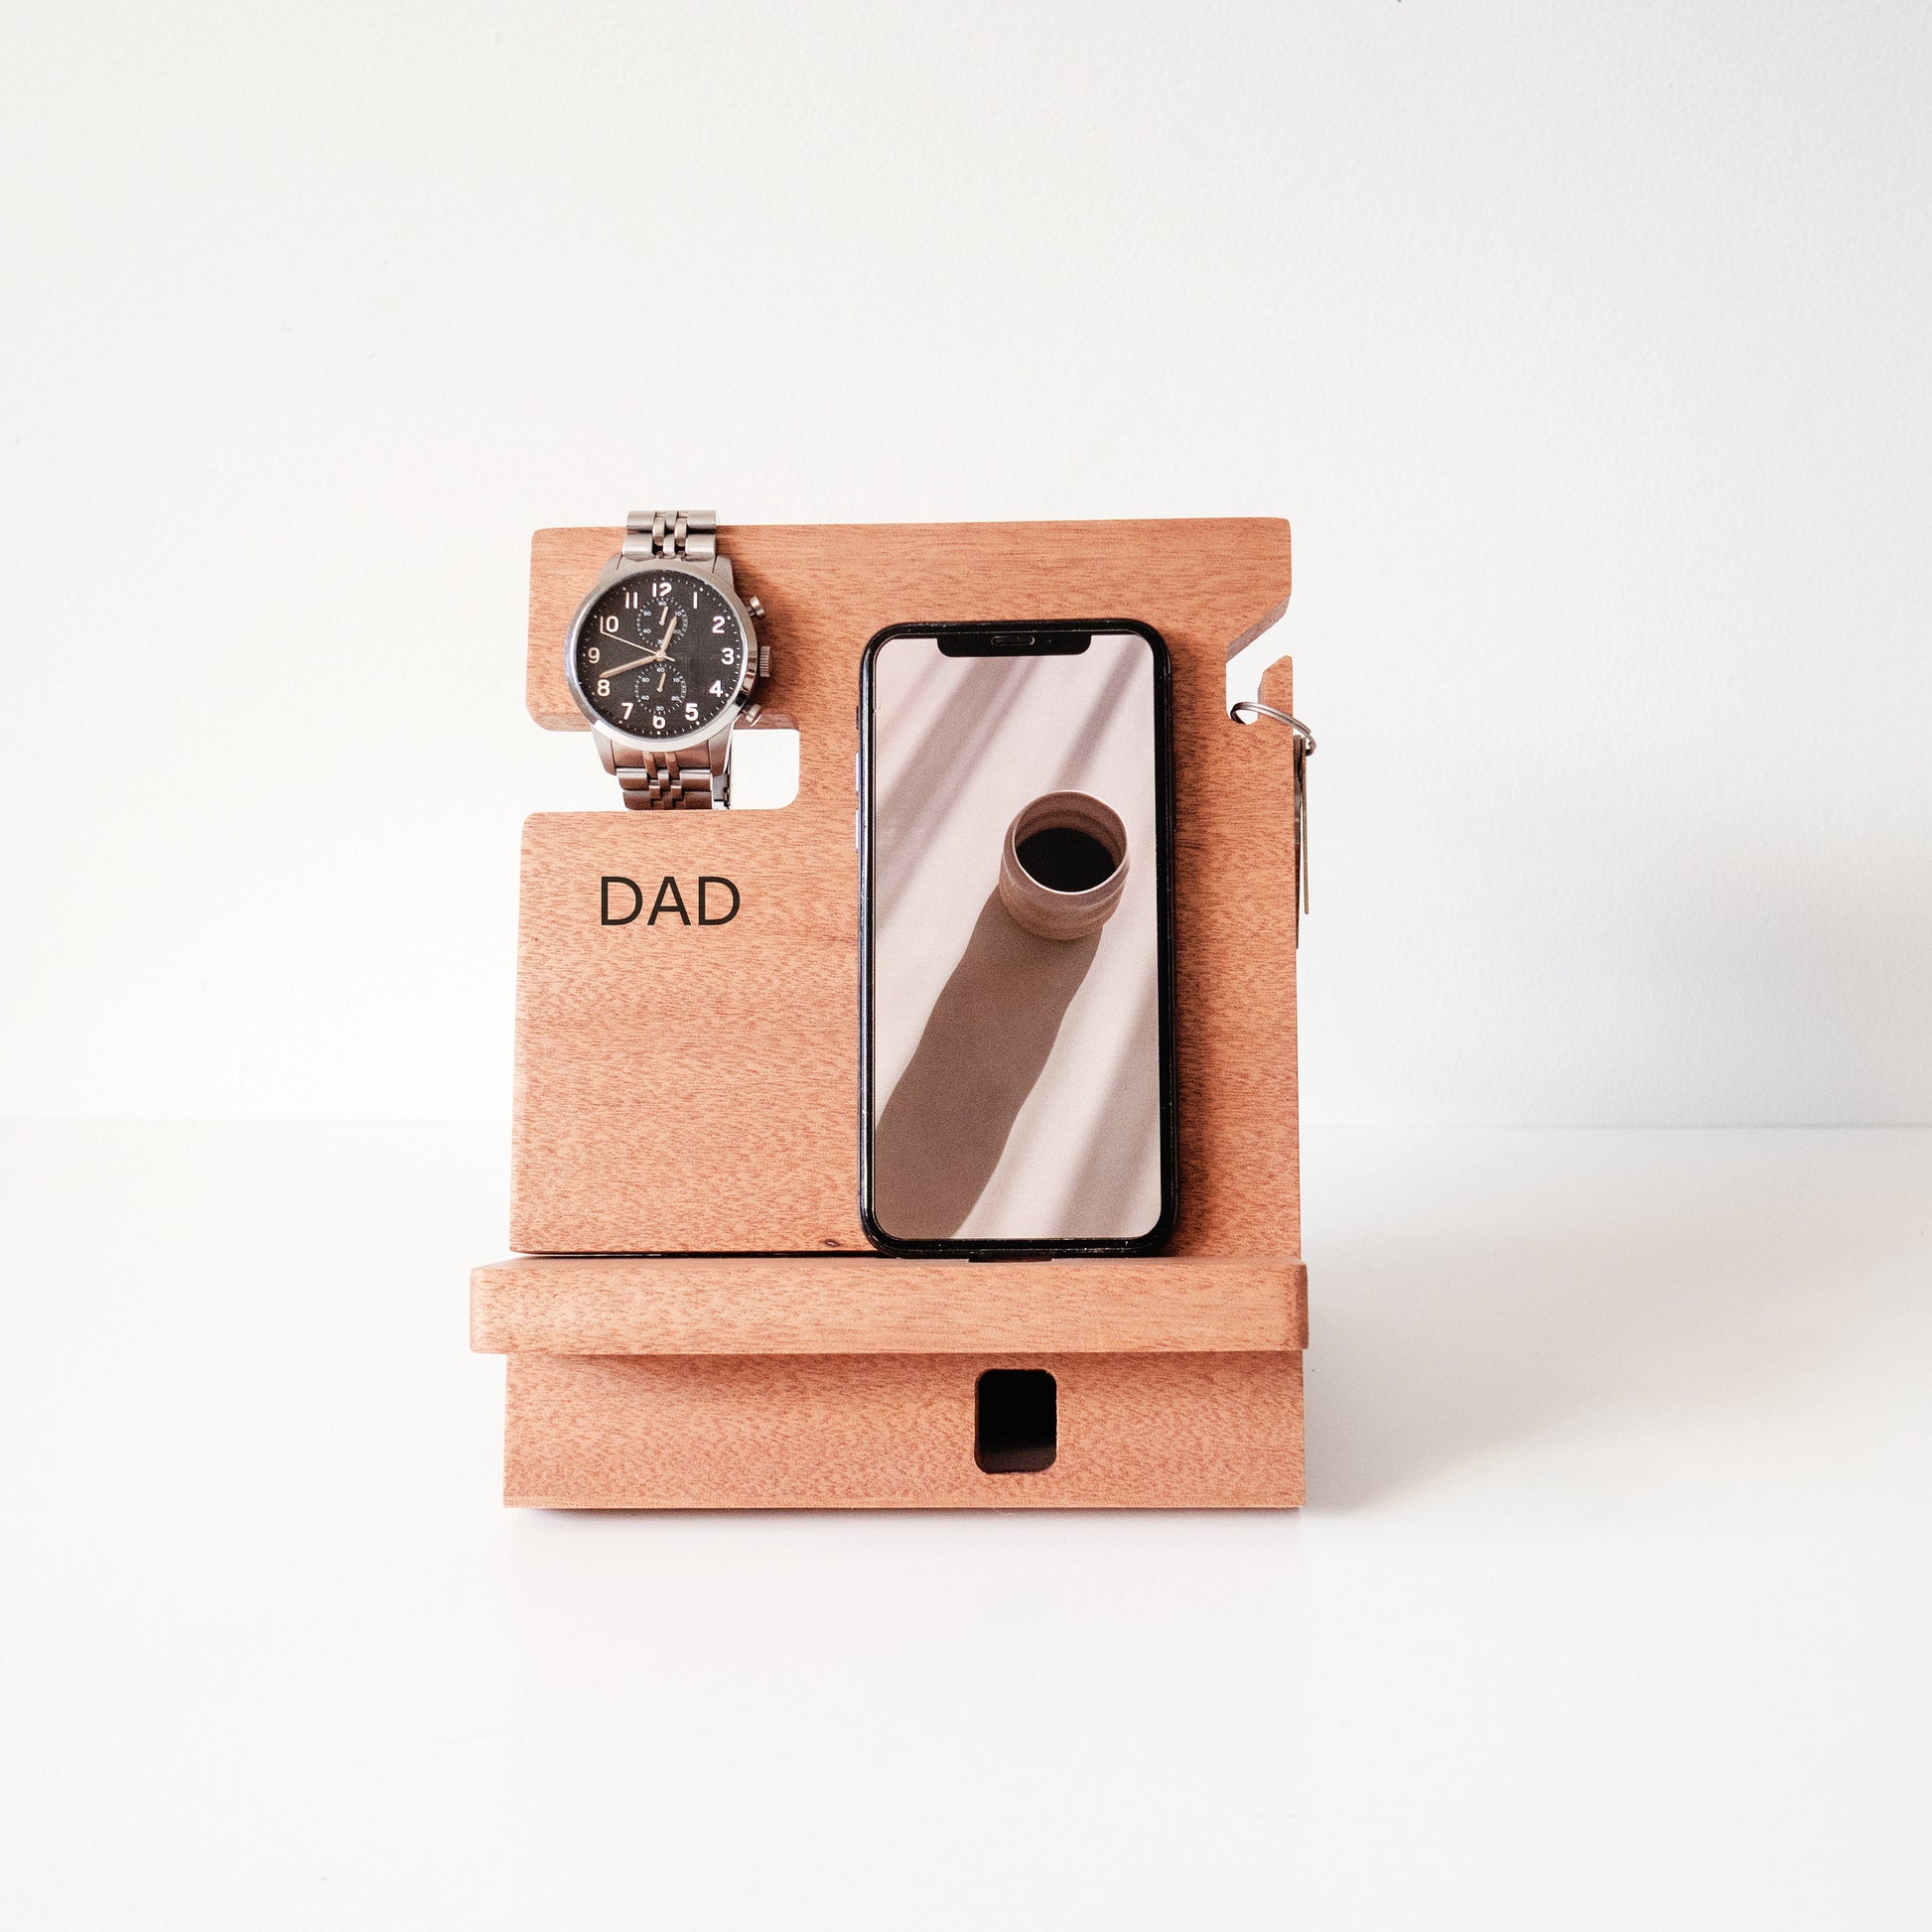 Father's Day Gift - Phone Docking Station for men, Personalised docking station, Gift for Him, Birthday Gift, Wooden Anniversary Gift